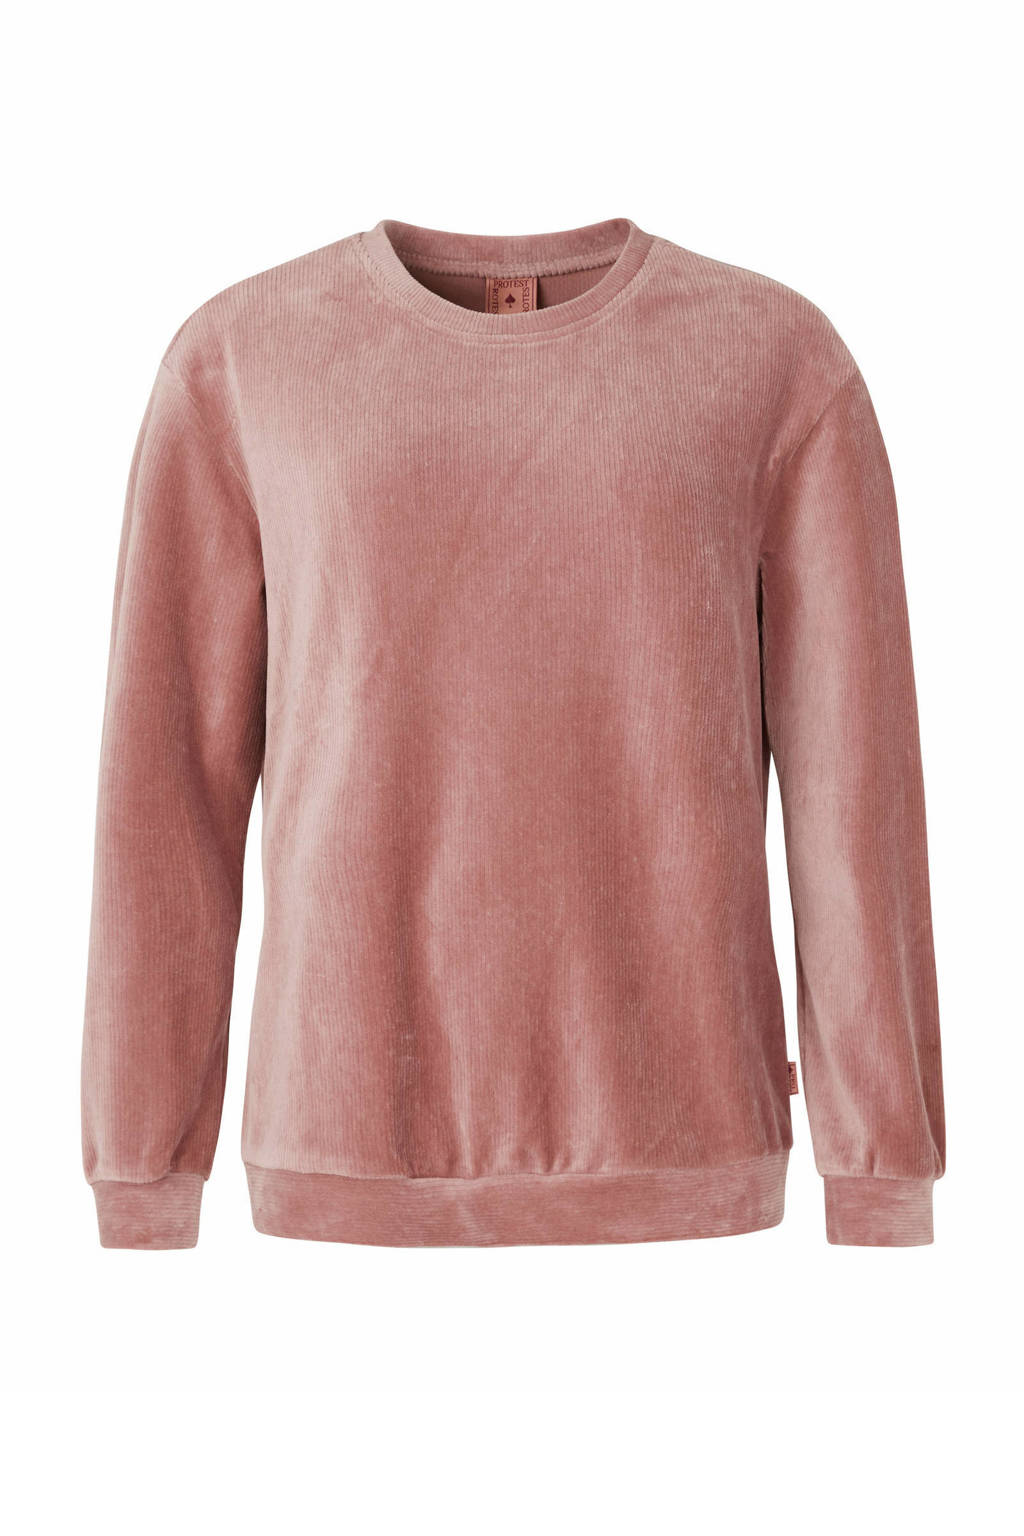 Protest sweater PRTCHYRESE roze